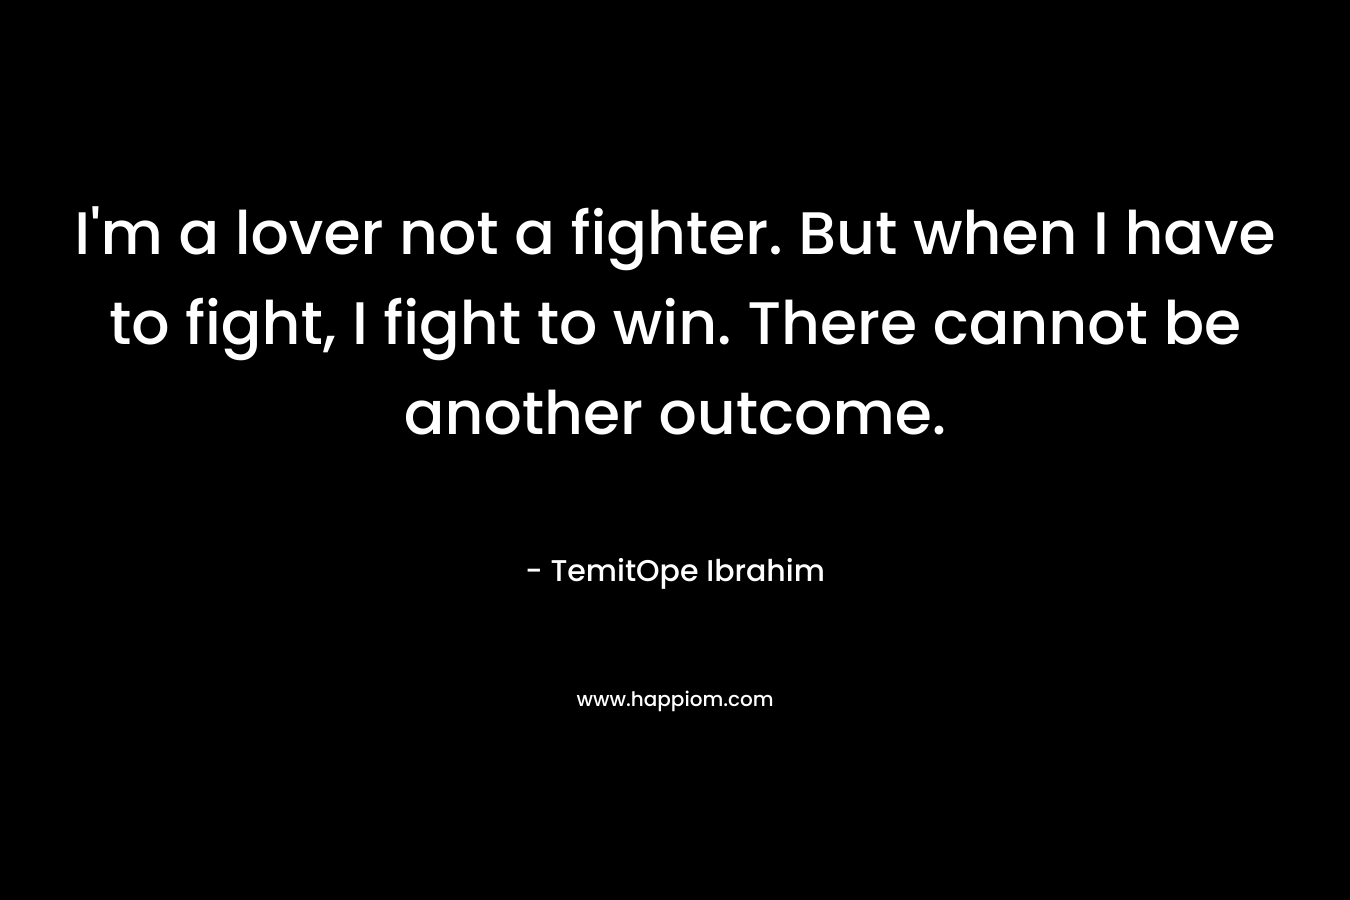 I’m a lover not a fighter. But when I have to fight, I fight to win. There cannot be another outcome. – TemitOpe Ibrahim